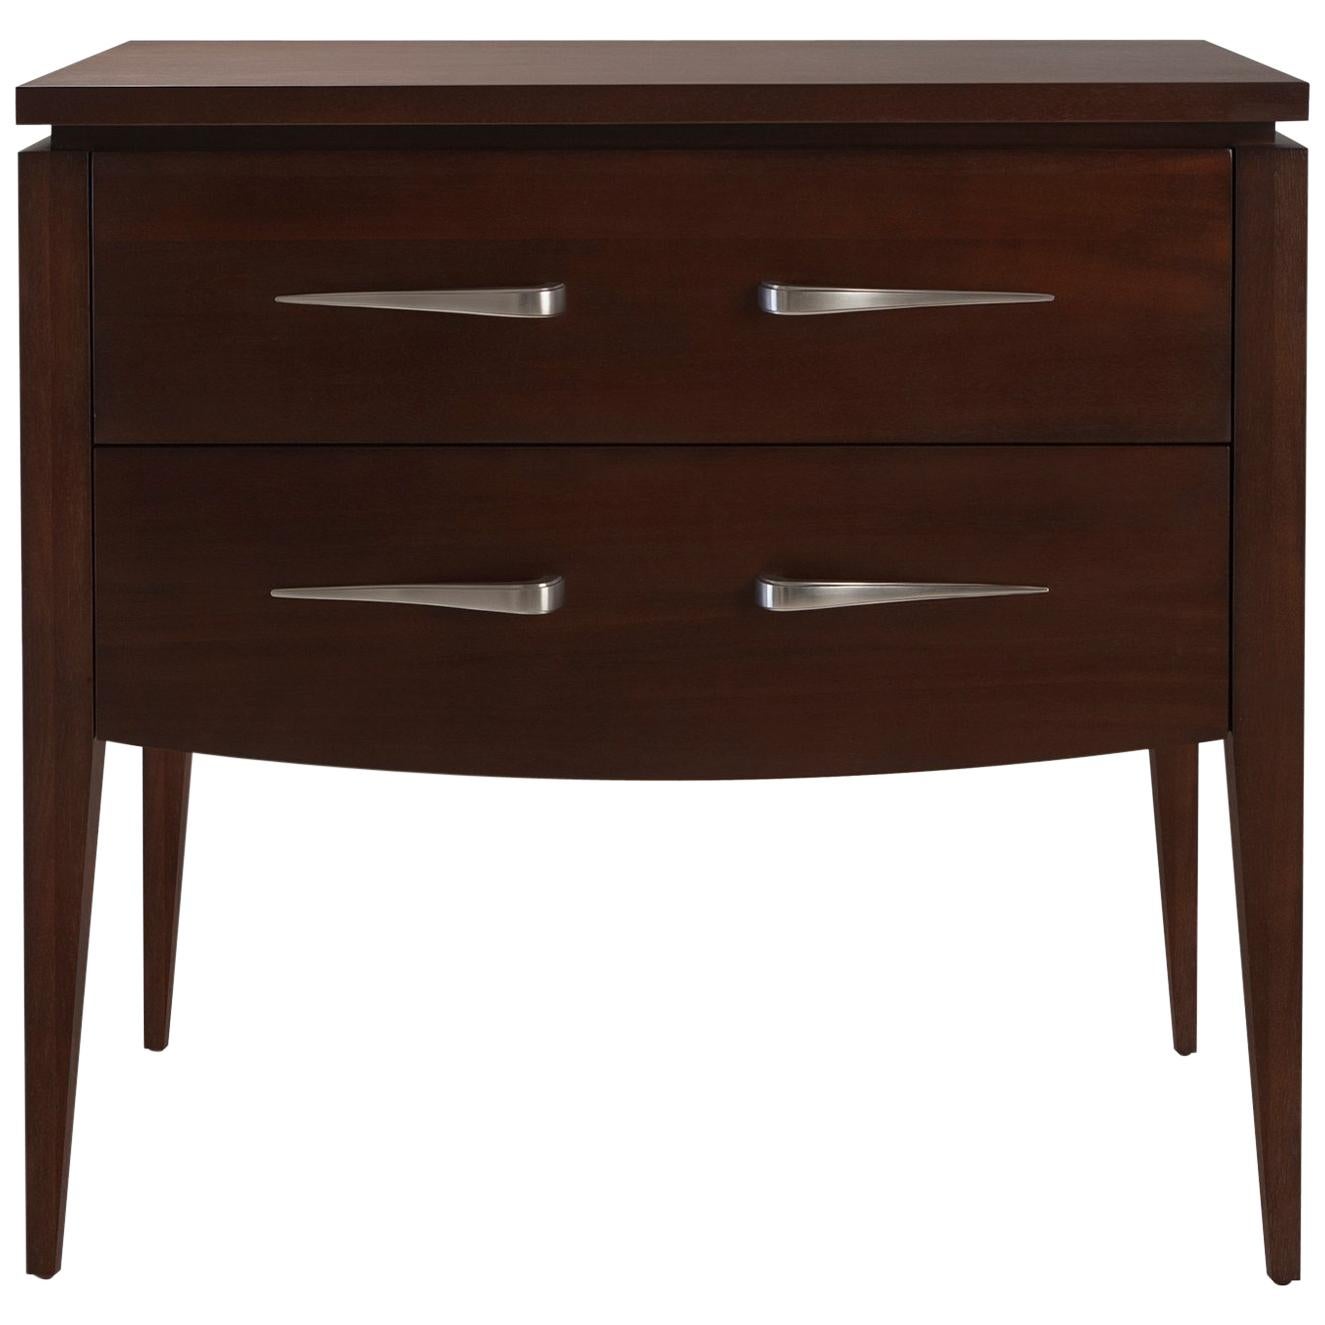 Cheraton Side Table or Nightstand in Solid Mahogany